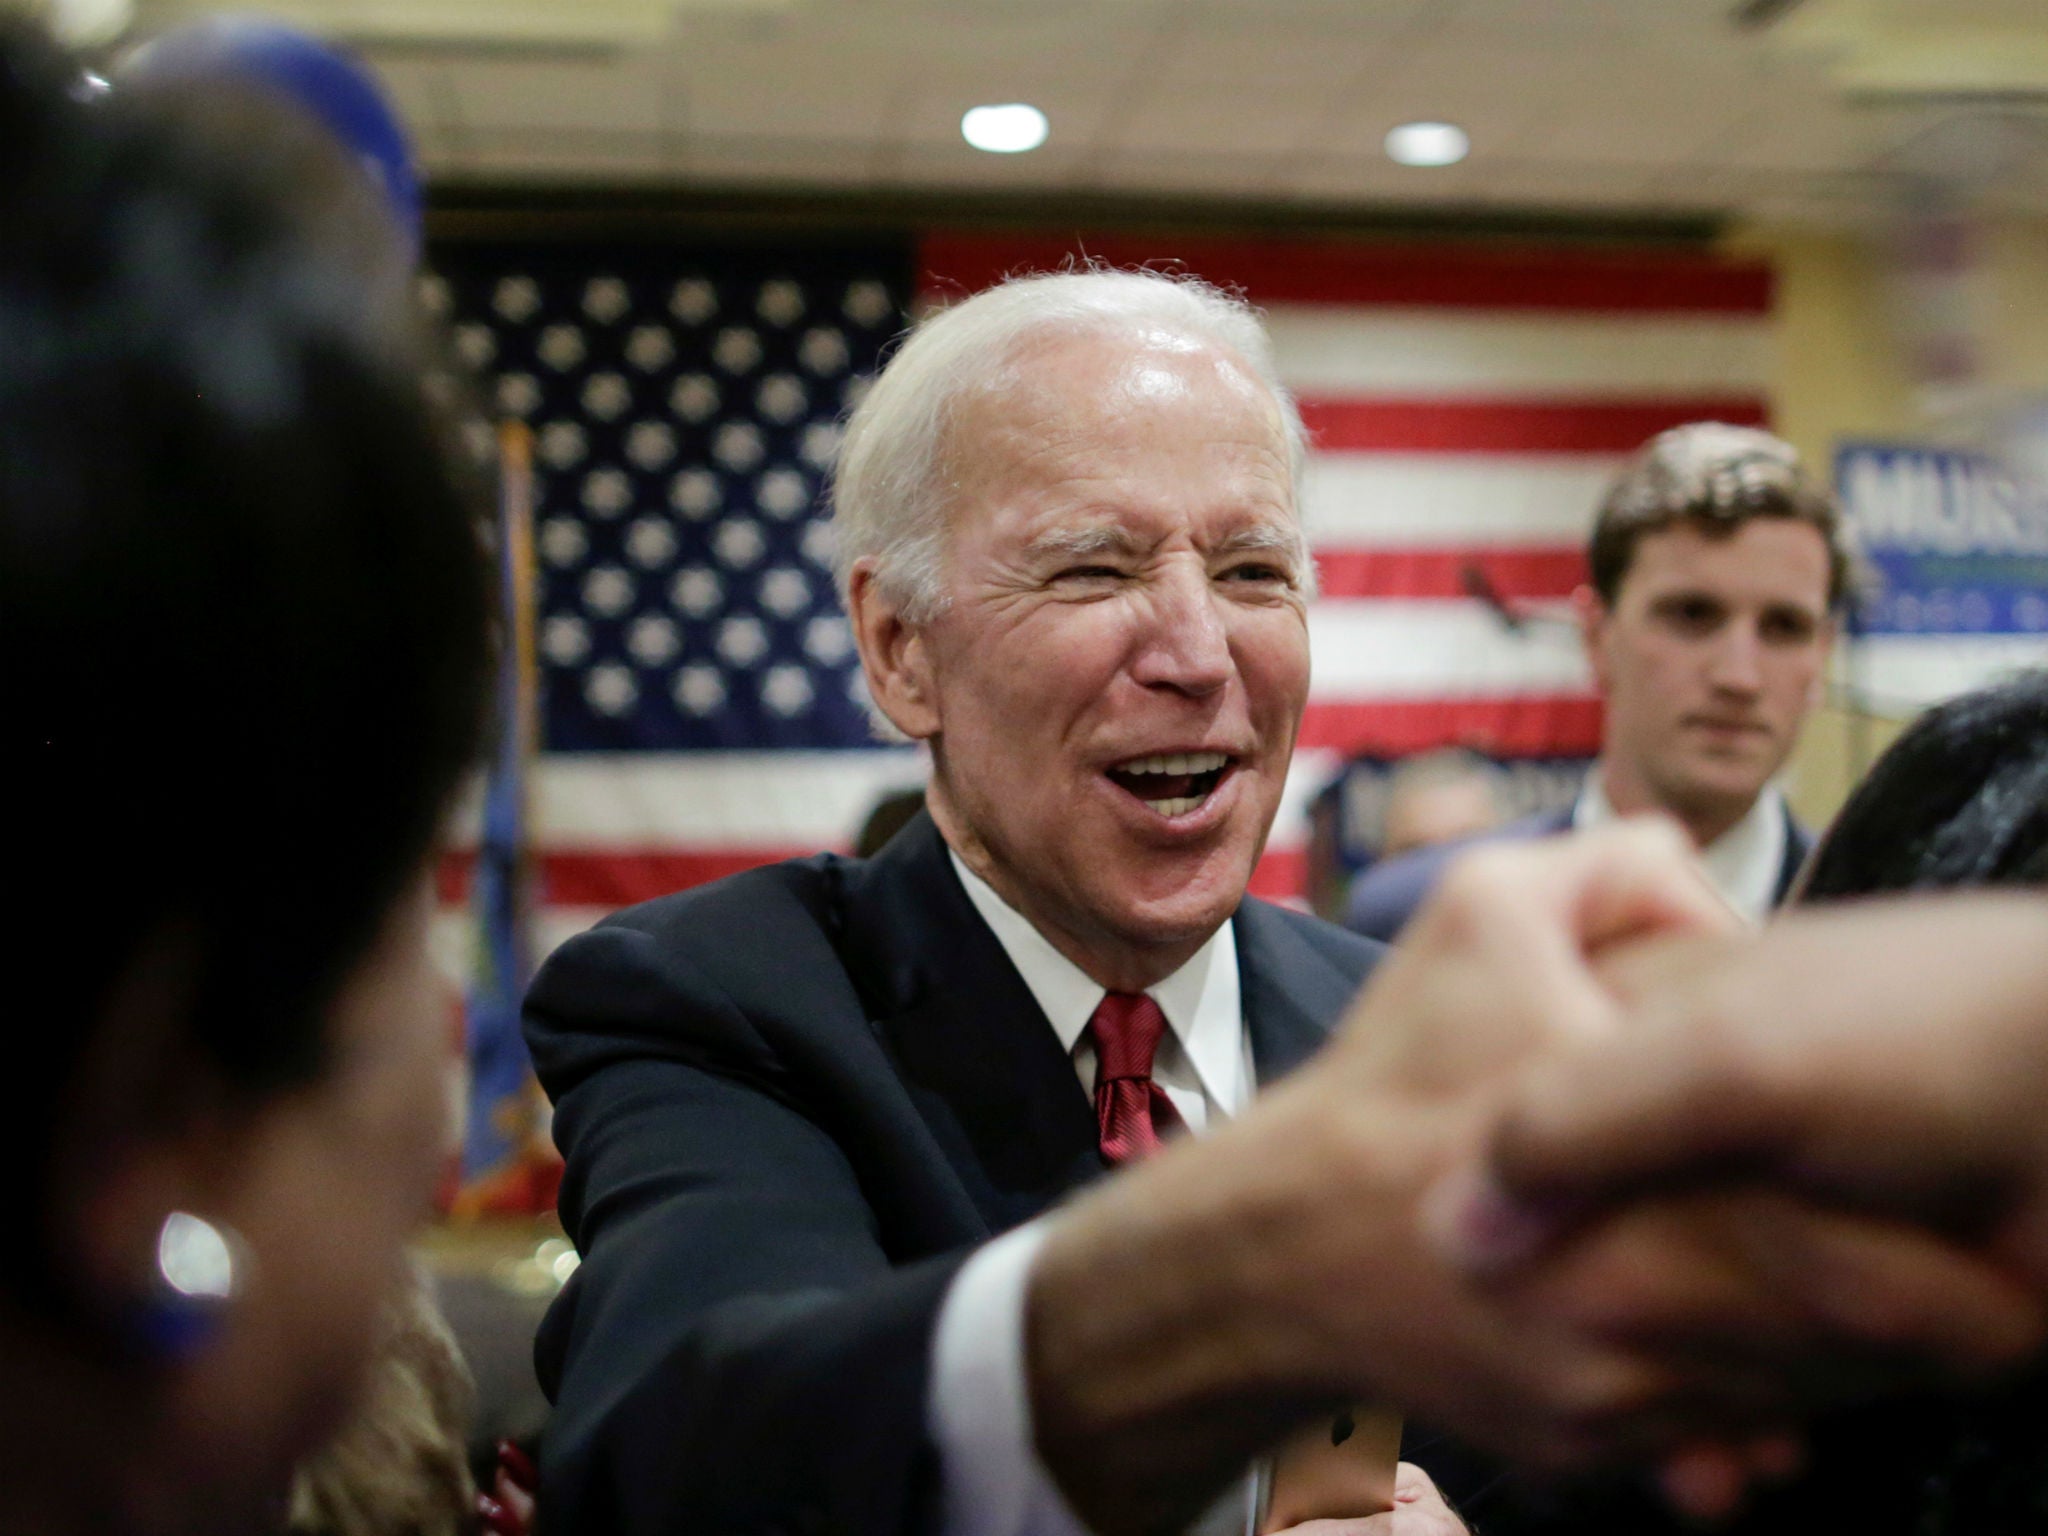 Joe Biden greets attendees at the end of a political rally in Newark, New Jersey on October 12, 2017.